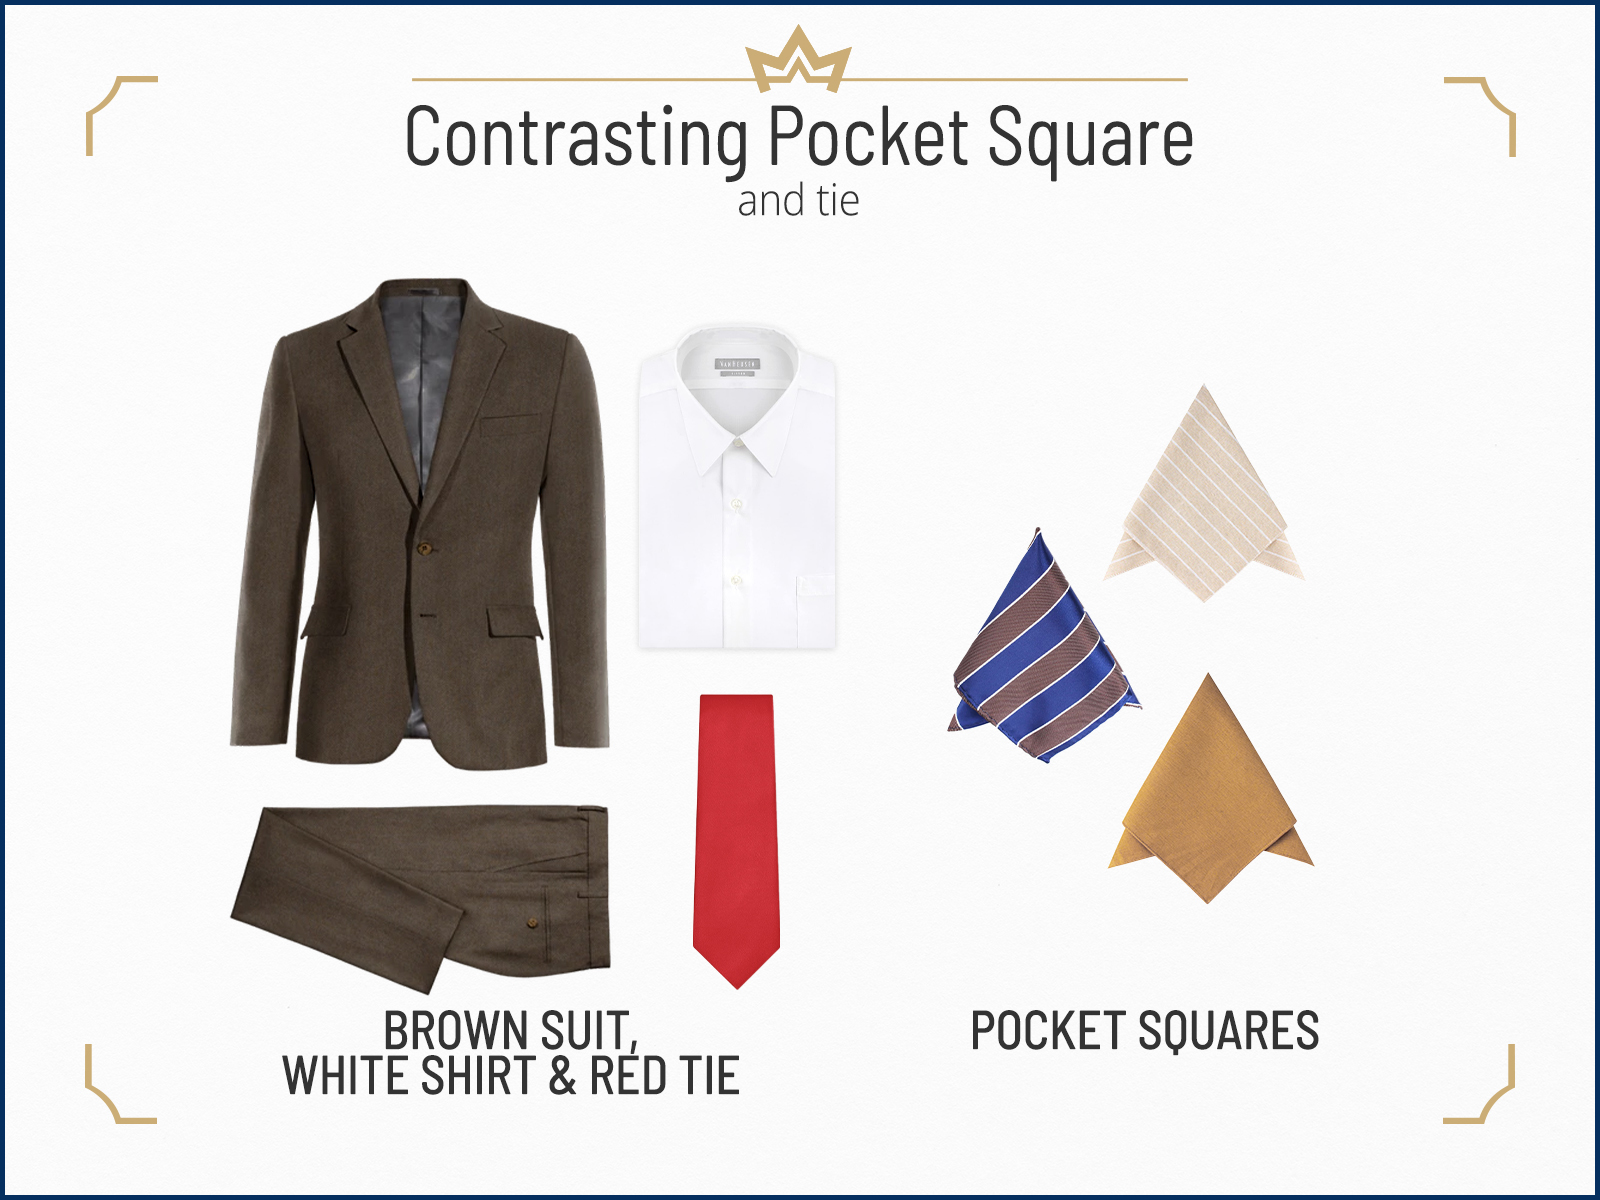 Matching the brown suit with a red tie and contrasting pocket squares